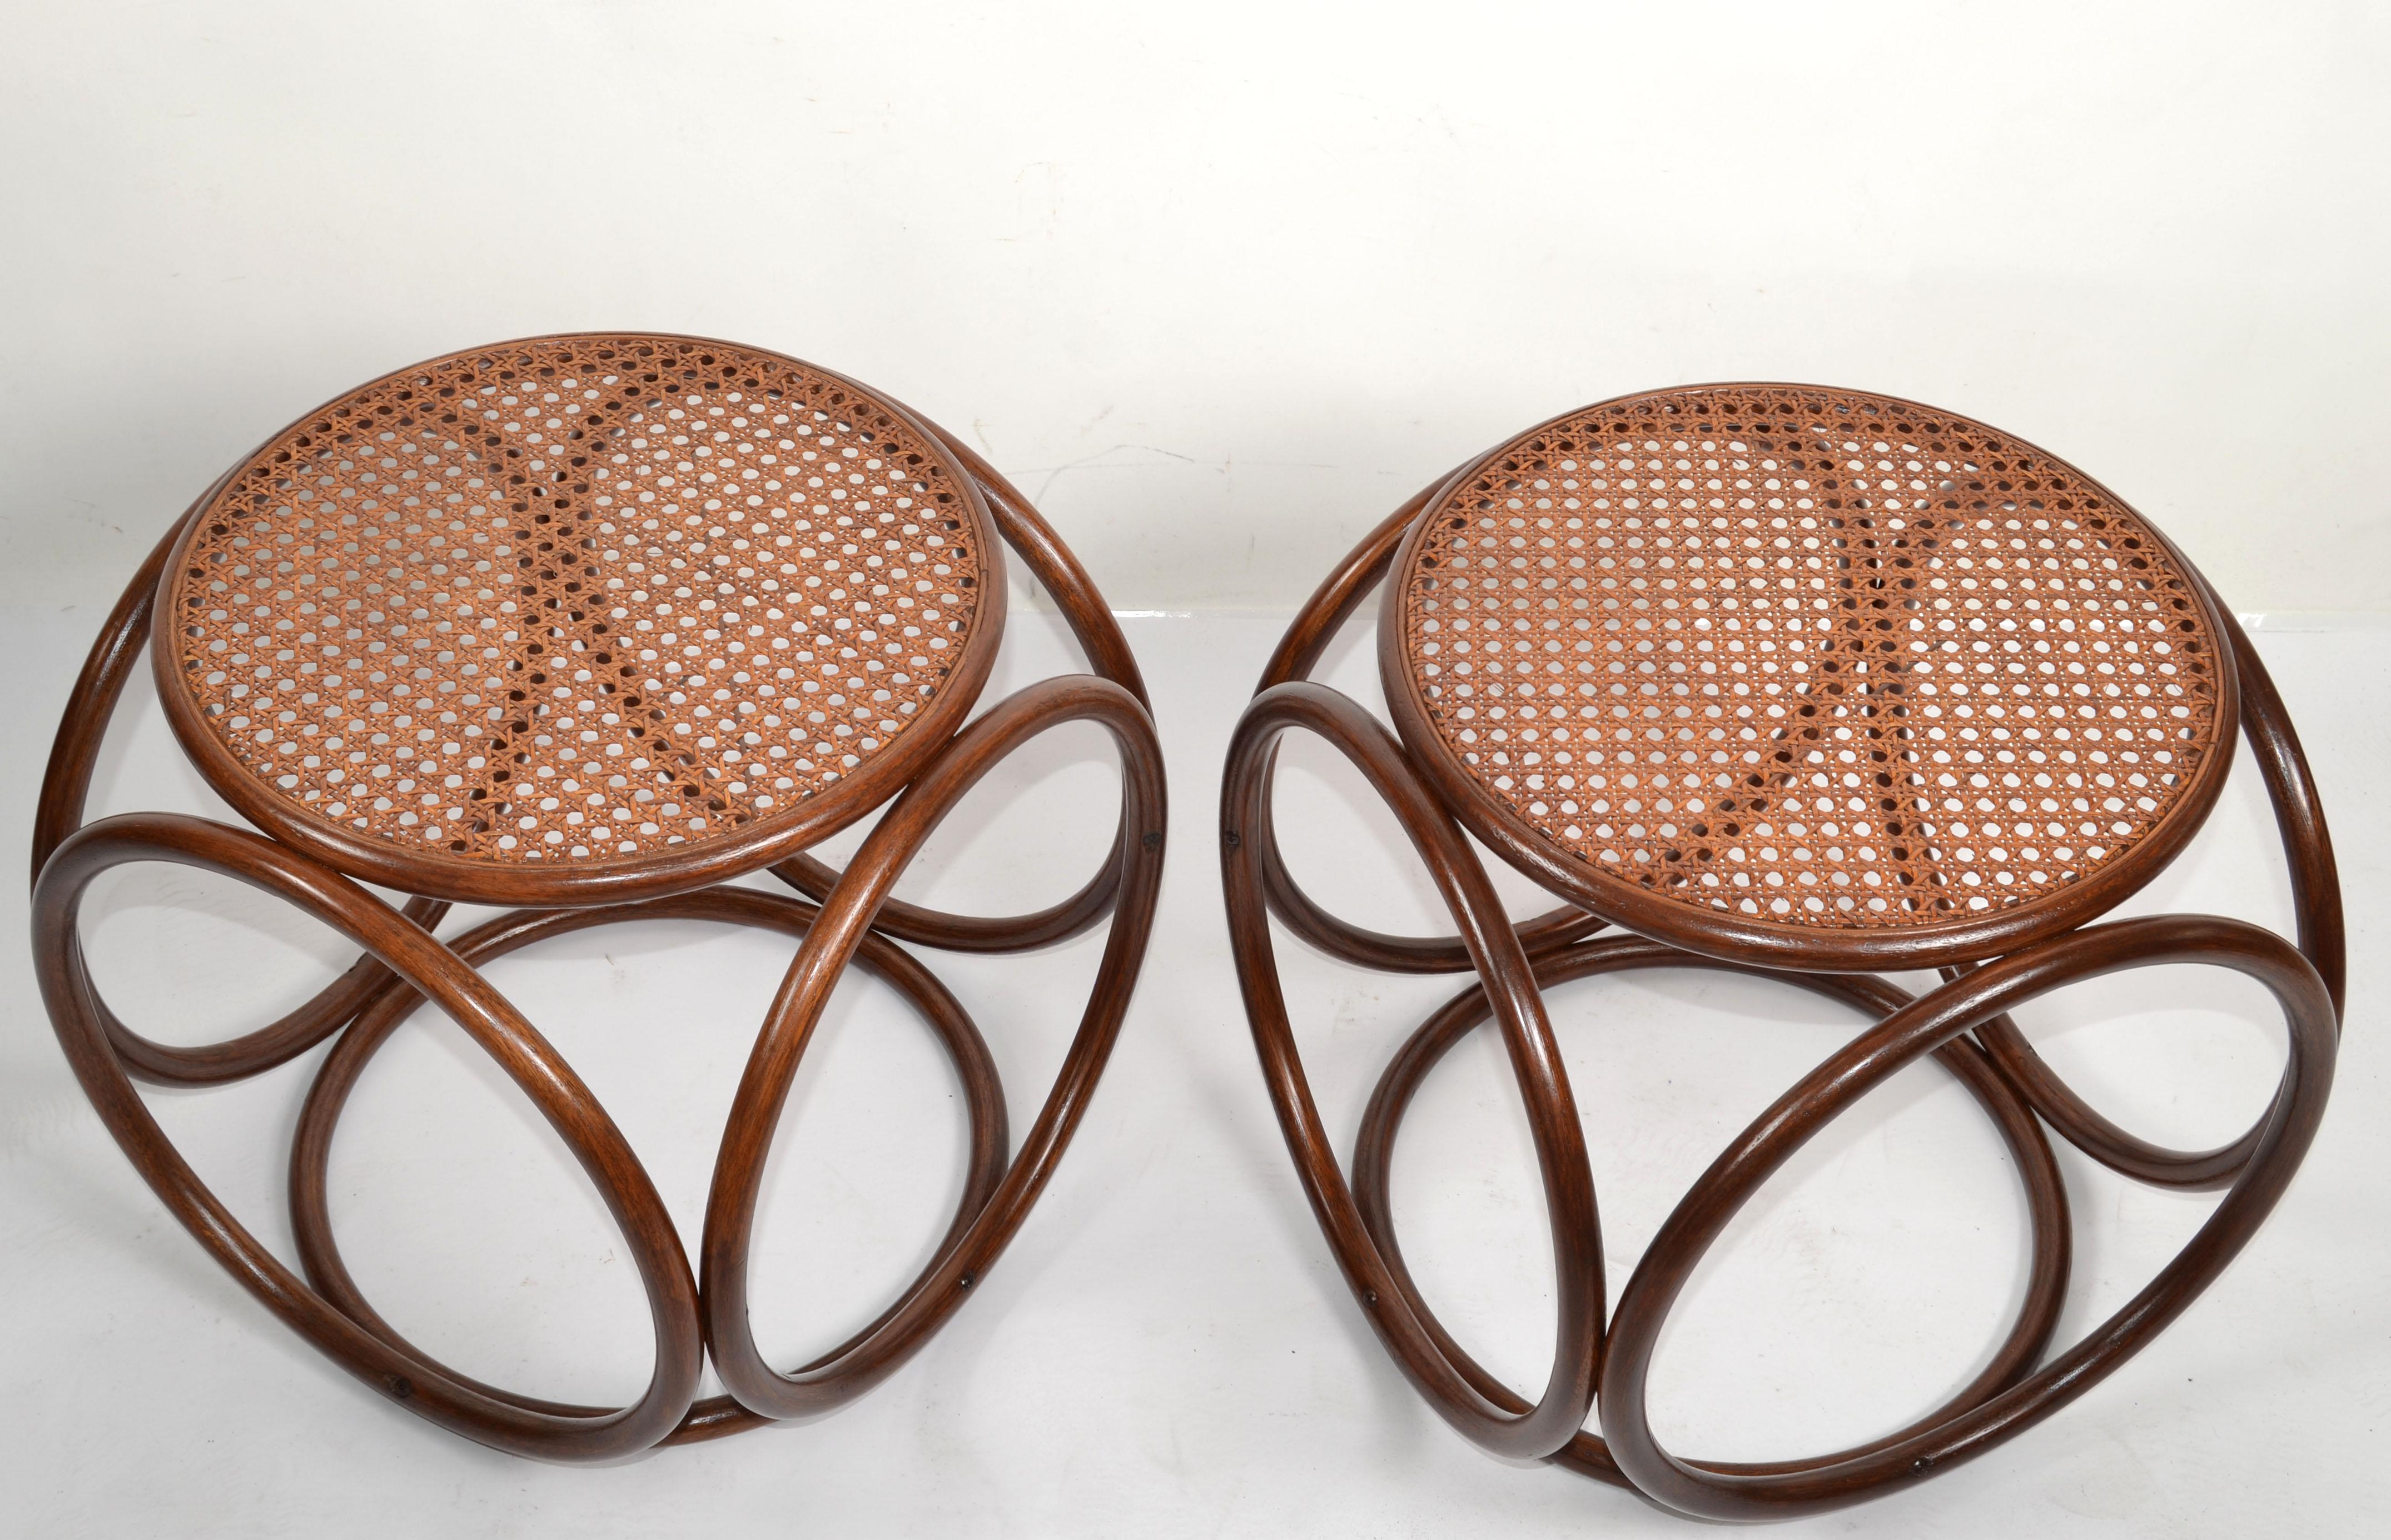 Pair of Michael Thonet attributed classic and timeless Mid-Century Modern bentwood and cane stool, ottoman, side table, drinks table or end table made in Europe, Austria.
All rustic handwoven bentwood and wicker cane top stool or side drinks